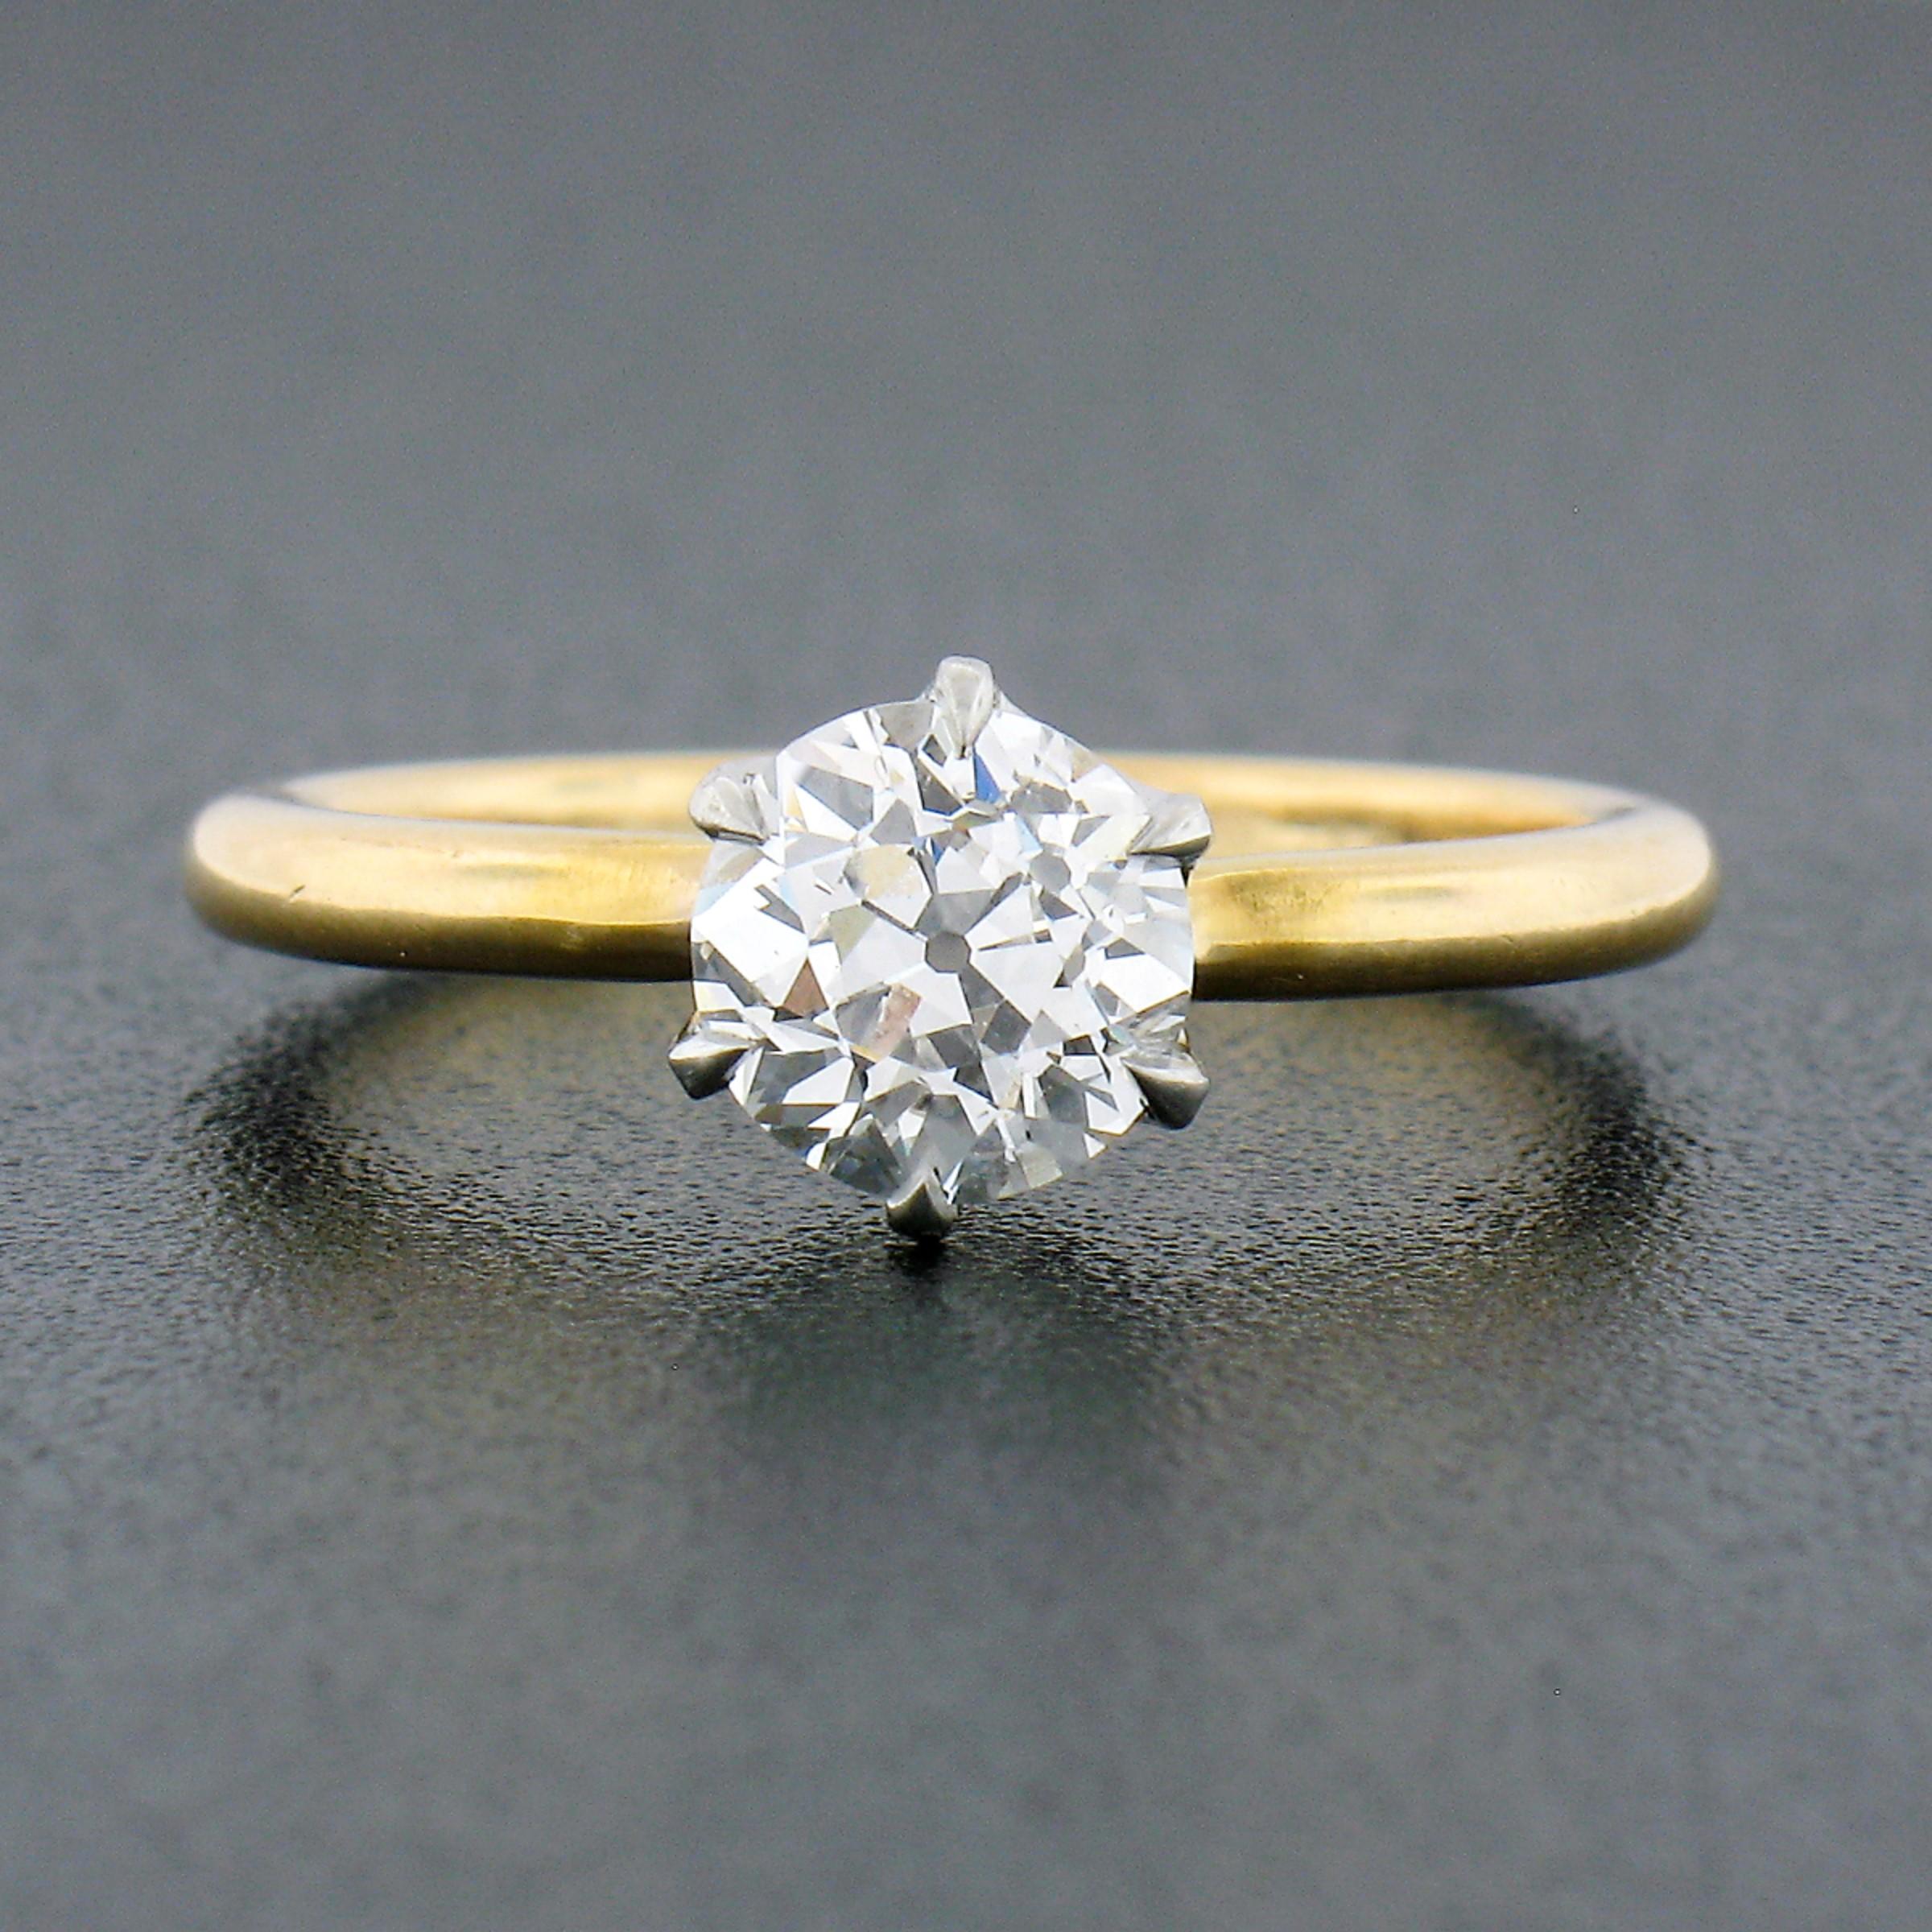 Here we have an absolutely gorgeous antique, Tiffany & Co., diamond solitaire engagement ring that was crafted during the Edwardian era from solid 18k yellow gold and platinum. It features a, GIA certified, old European cut diamond that is neatly